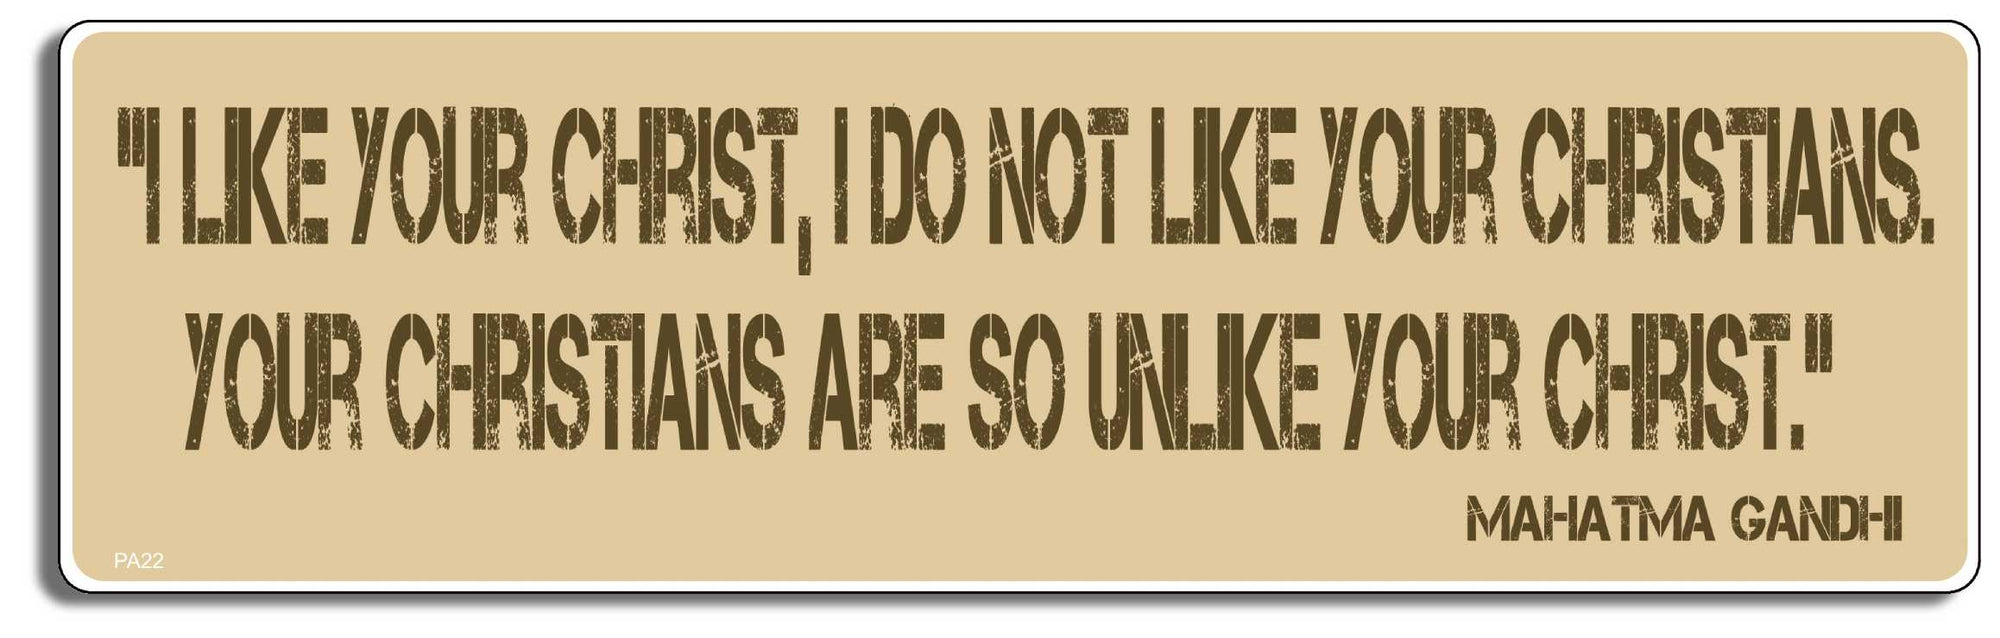 I like your Christ, I don't like your Christians. Your Christians are so unlike your Christ" Gandhi - 3" x 10" Bumper Sticker--Car Magnet- -  Decal Bumper Sticker-pagan Bumper Sticker Car Magnet I like your Christ, I don't like-  Decal for carsatheist, pagan, wiccan, witch